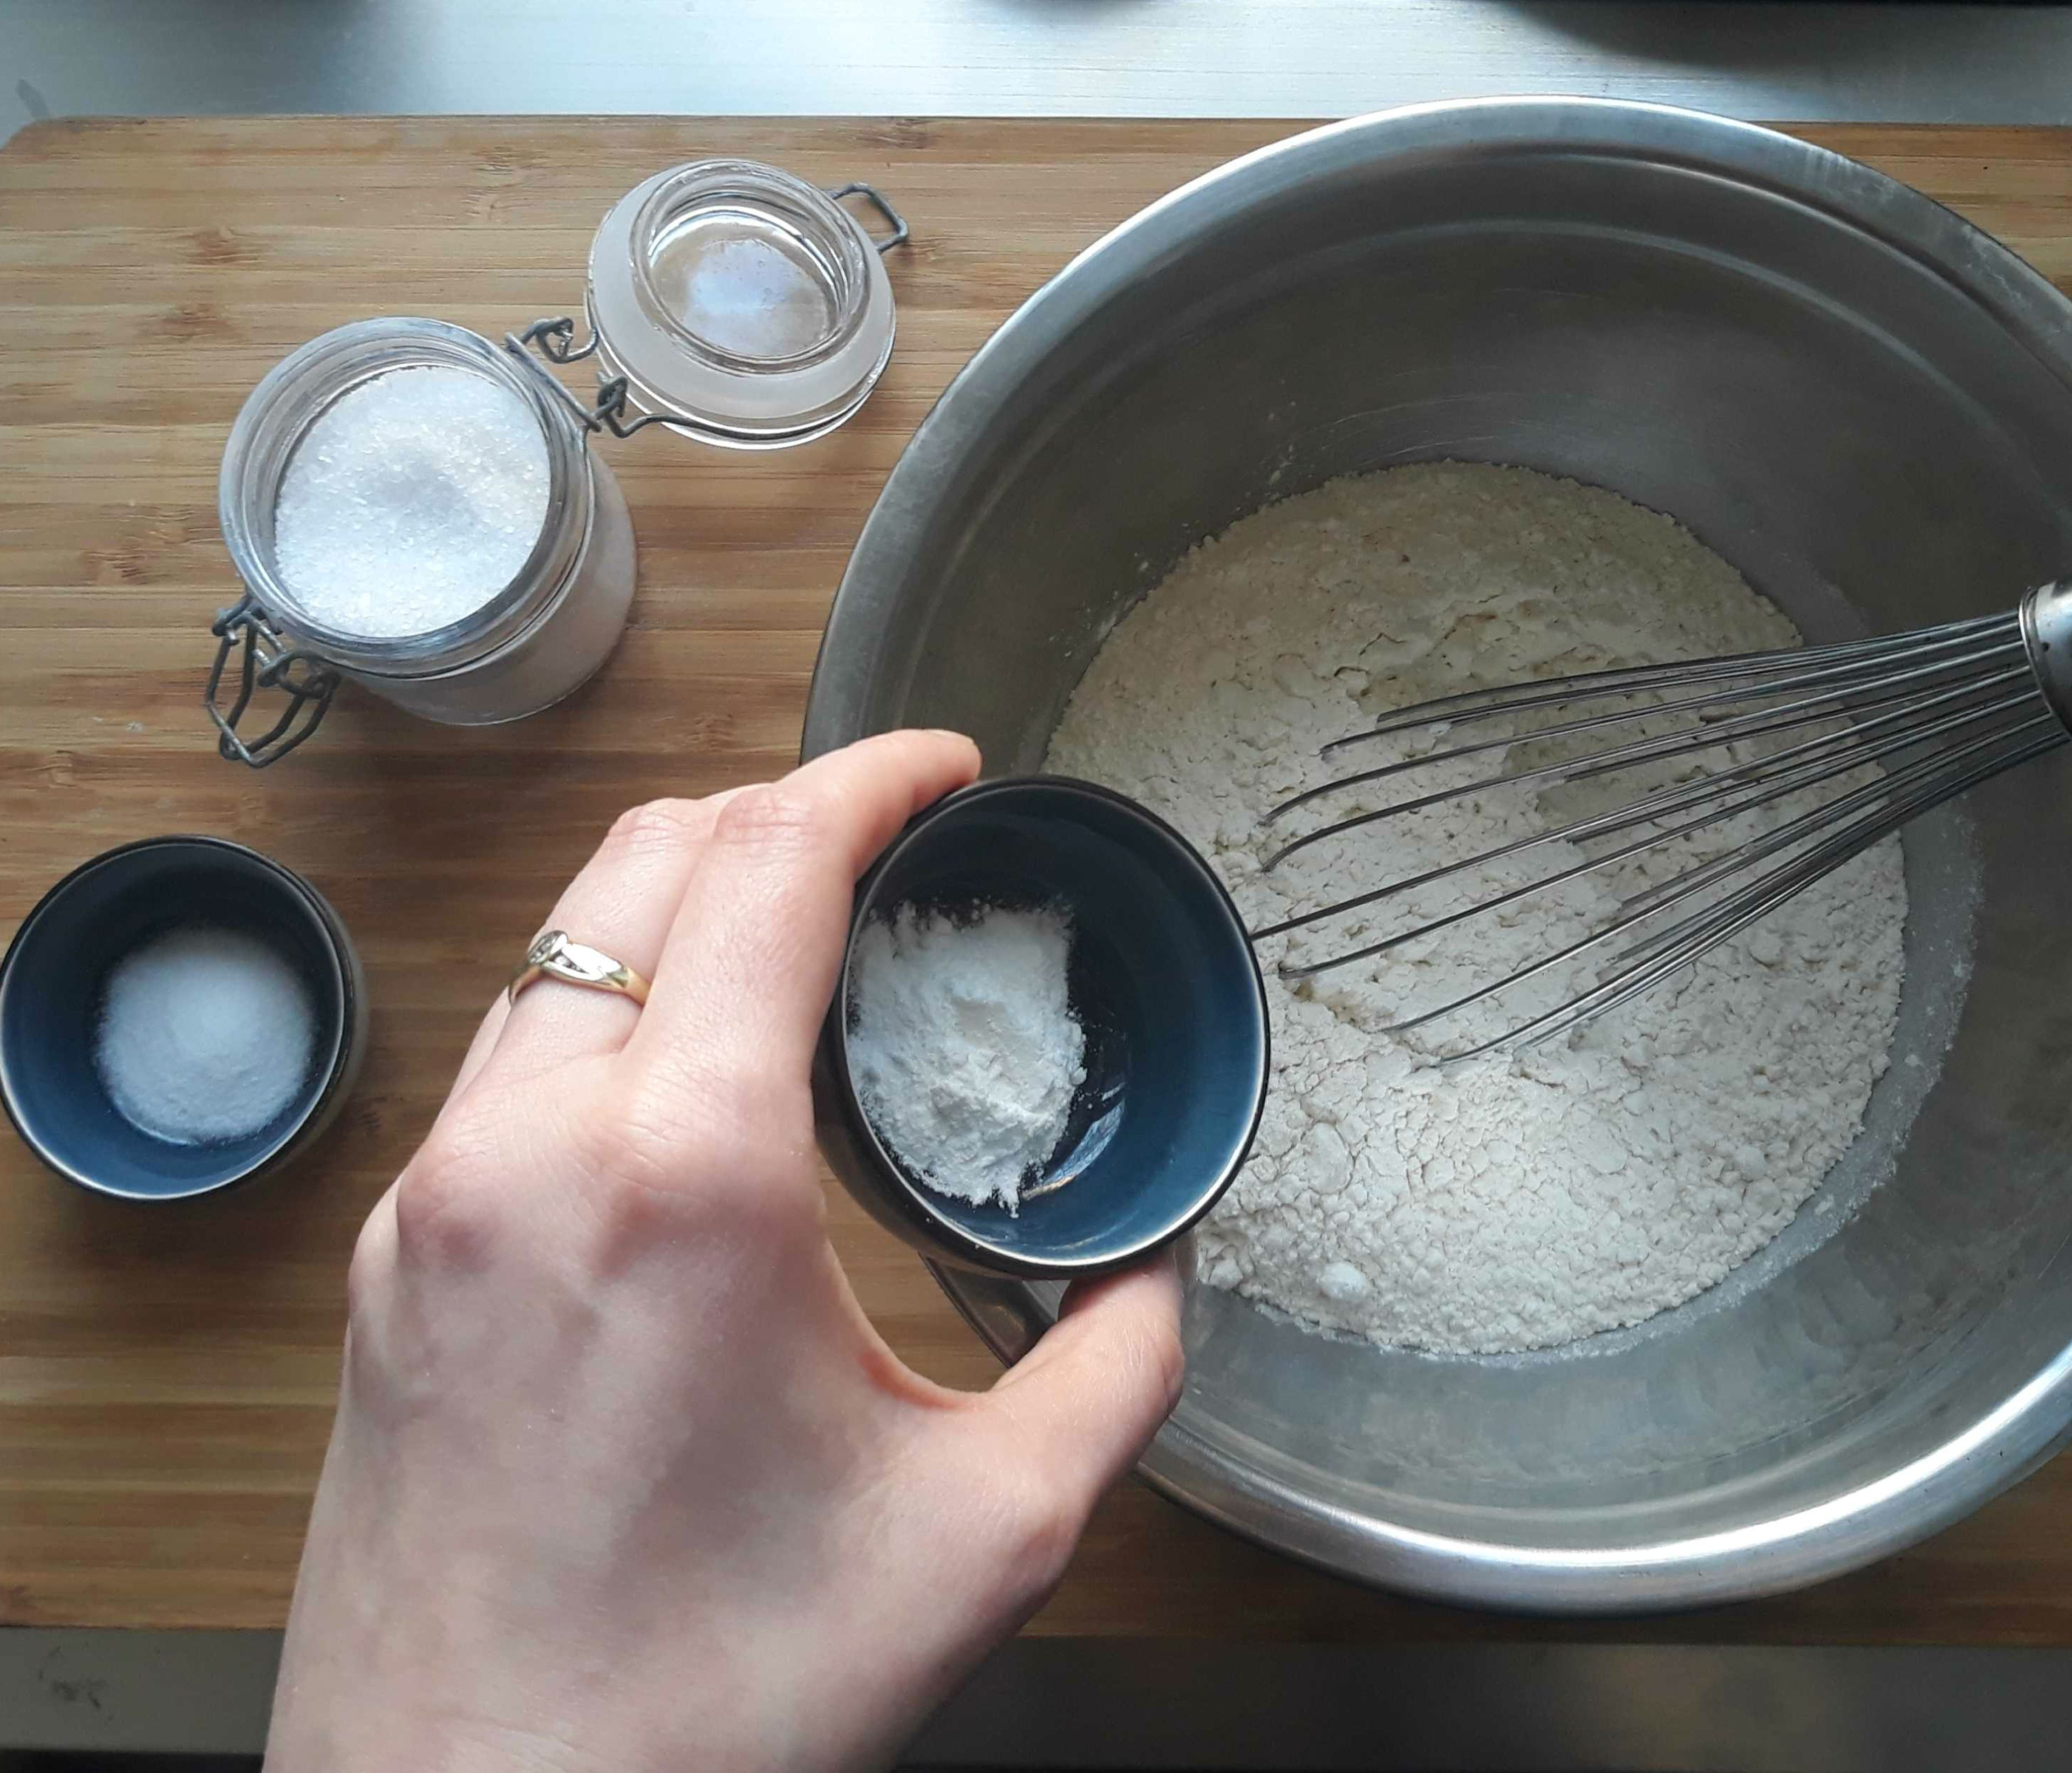 Mix flour, salt, baking soda, and baking powder in a bowl. Add the butter-sugar mixture and stir to combine. Refrigerate the dough for a few minutes.